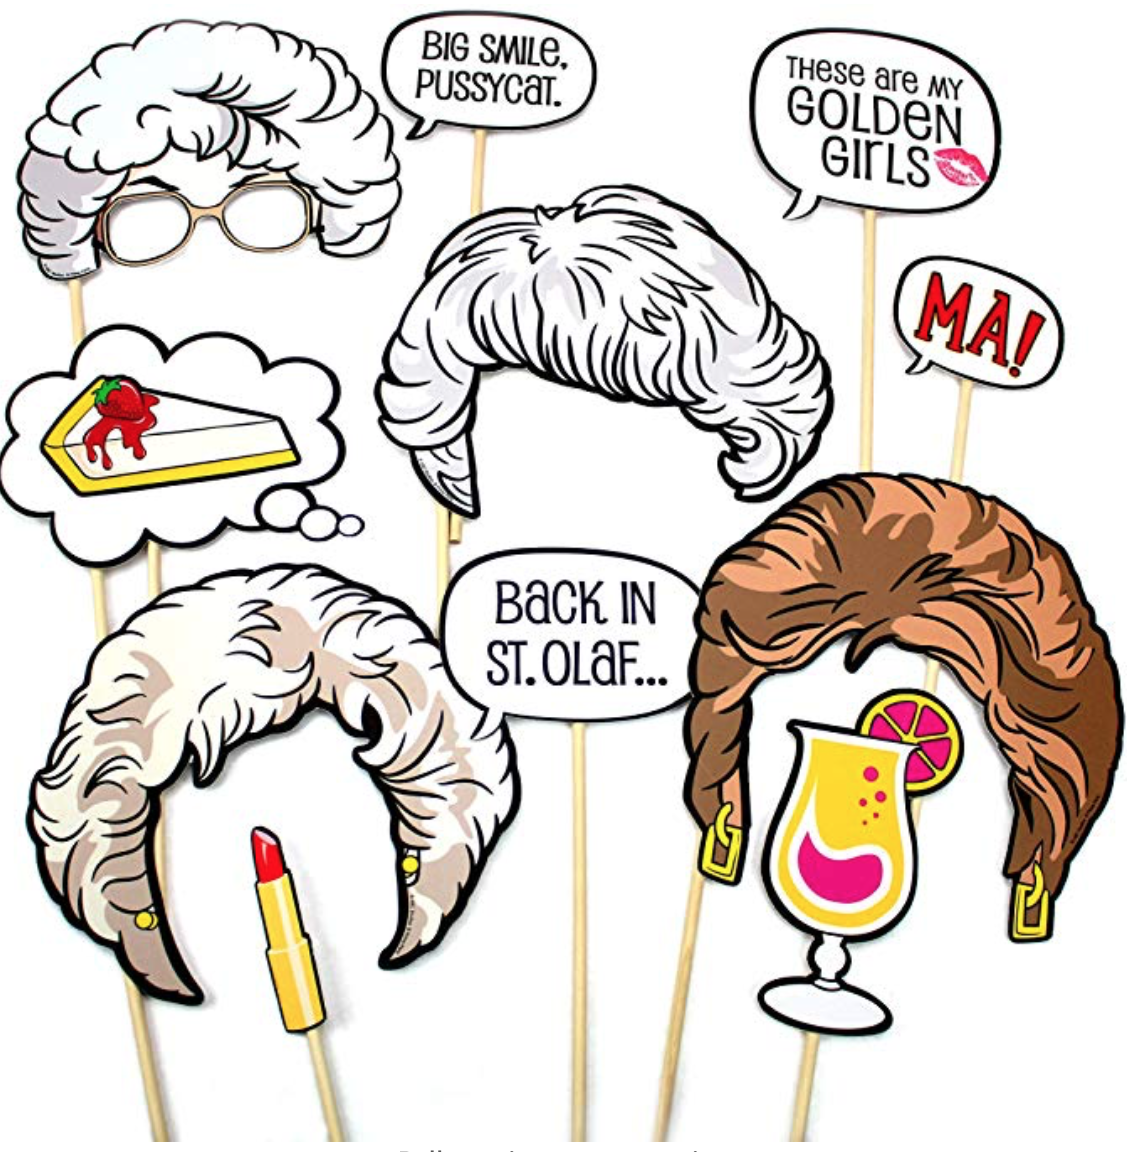 Golden Girls Photo Booth Props on Amazon.com